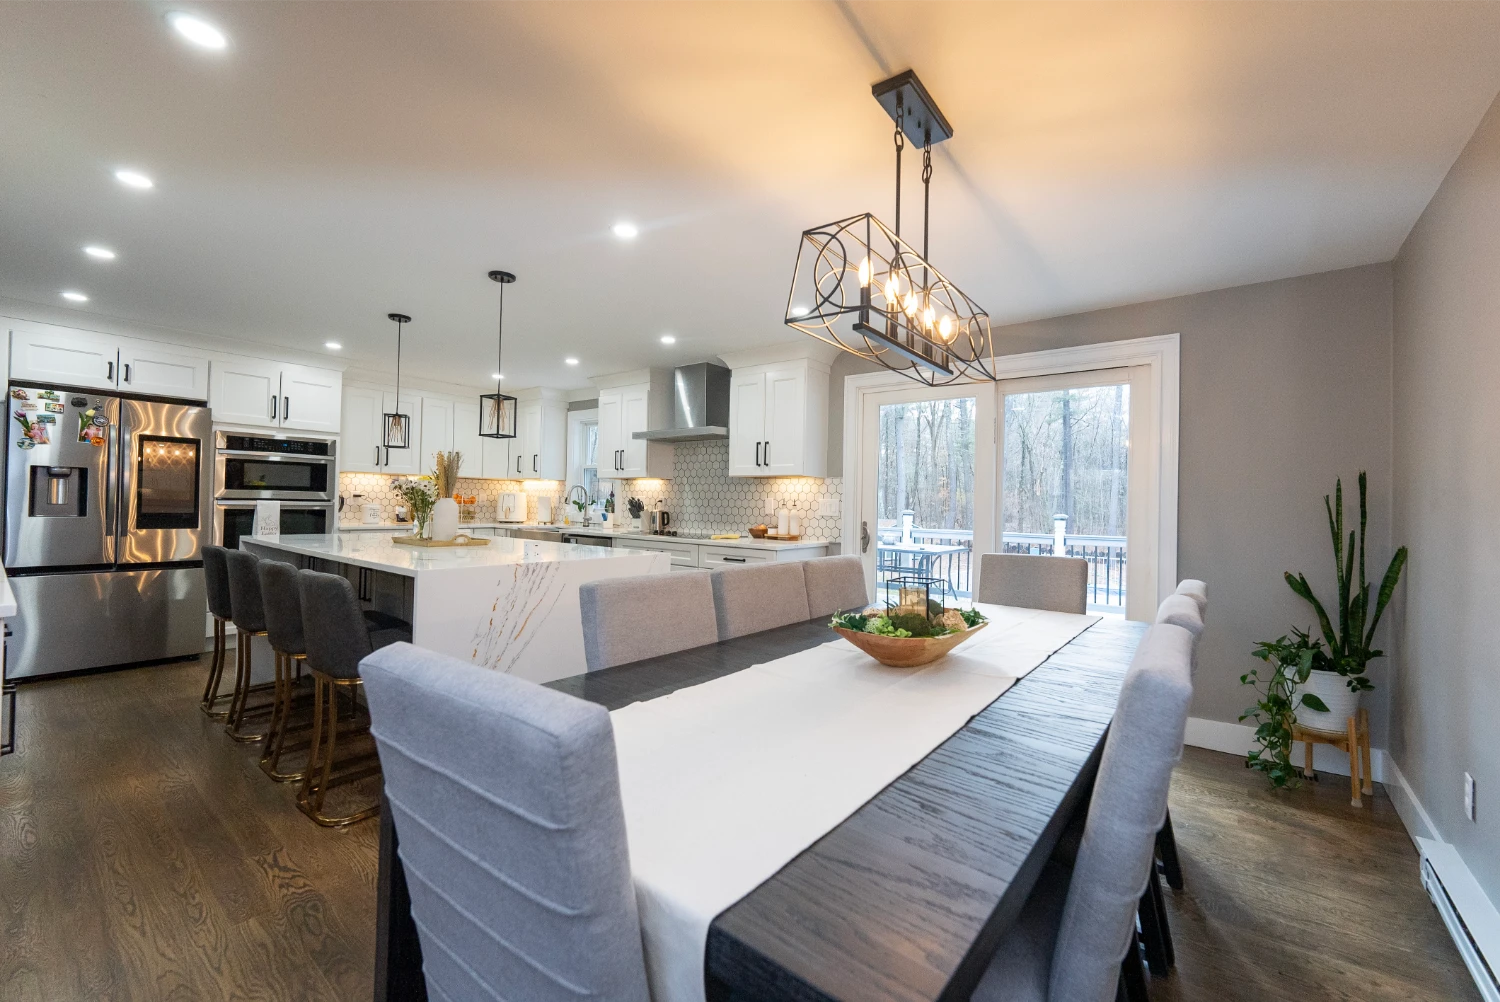 Renovated kitchen with white marble island, open shelves, and pendant lights.